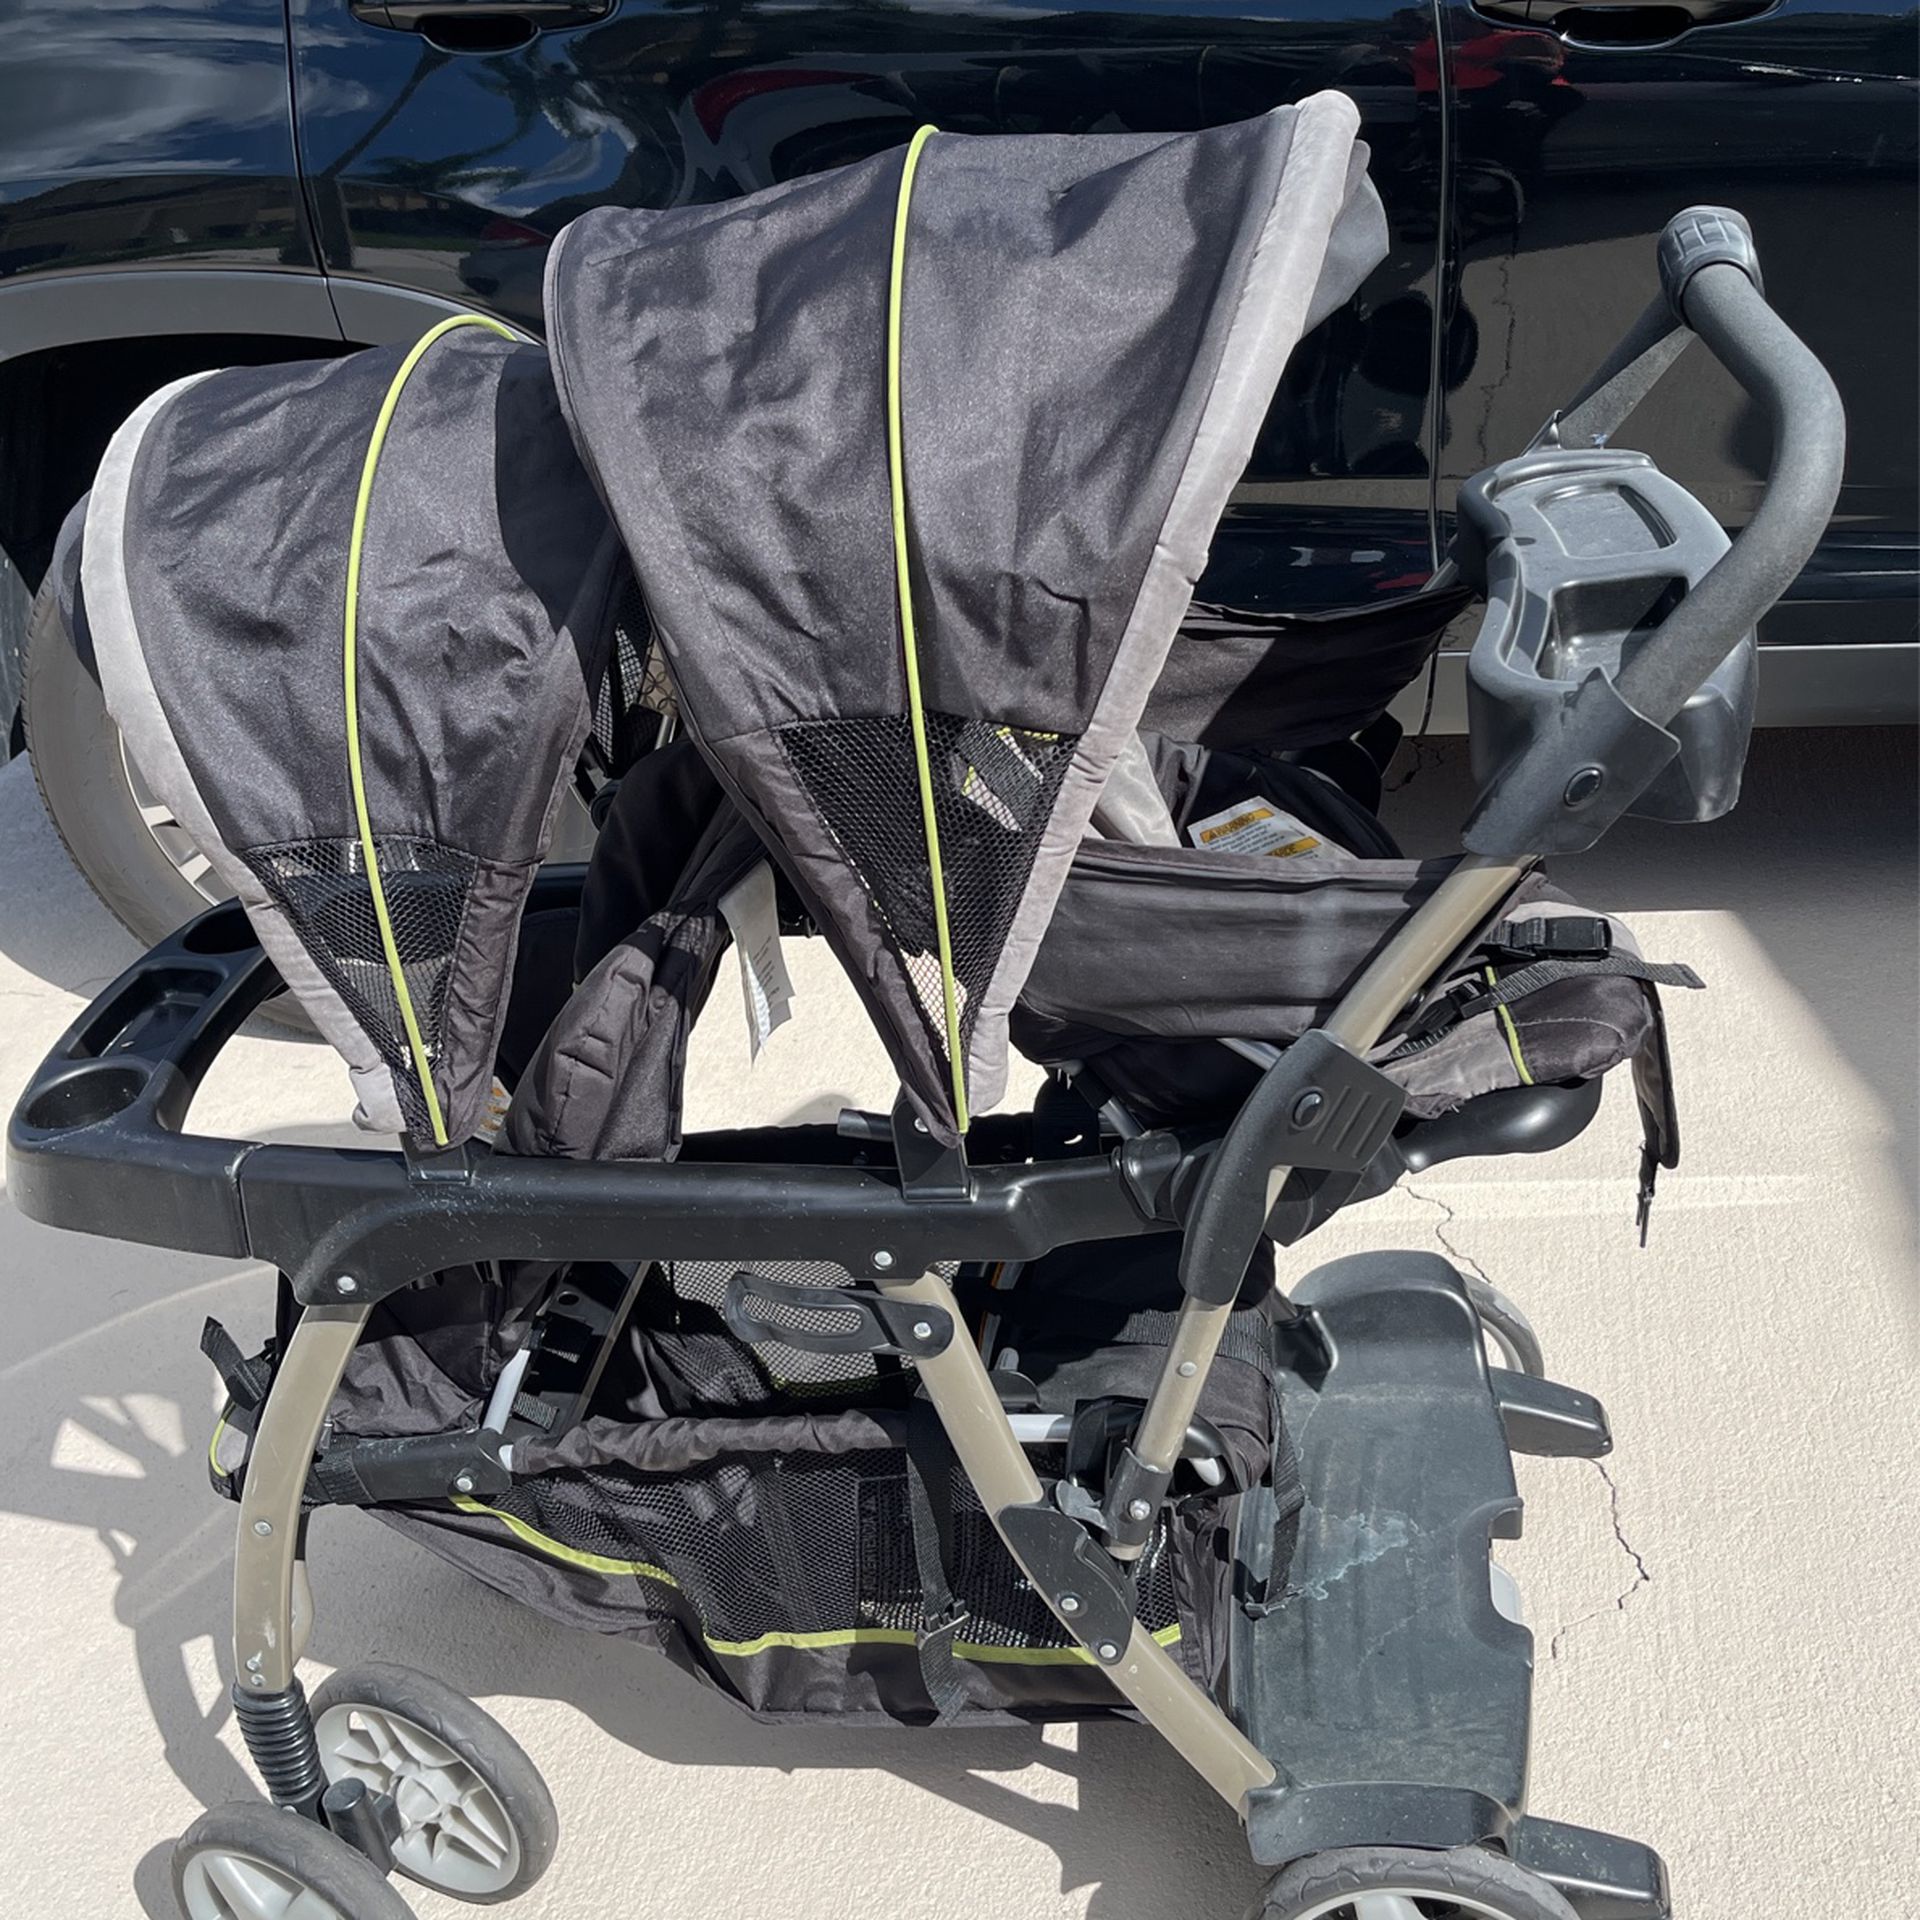 $50 Double Stroller In Great Shape! Easy To Store